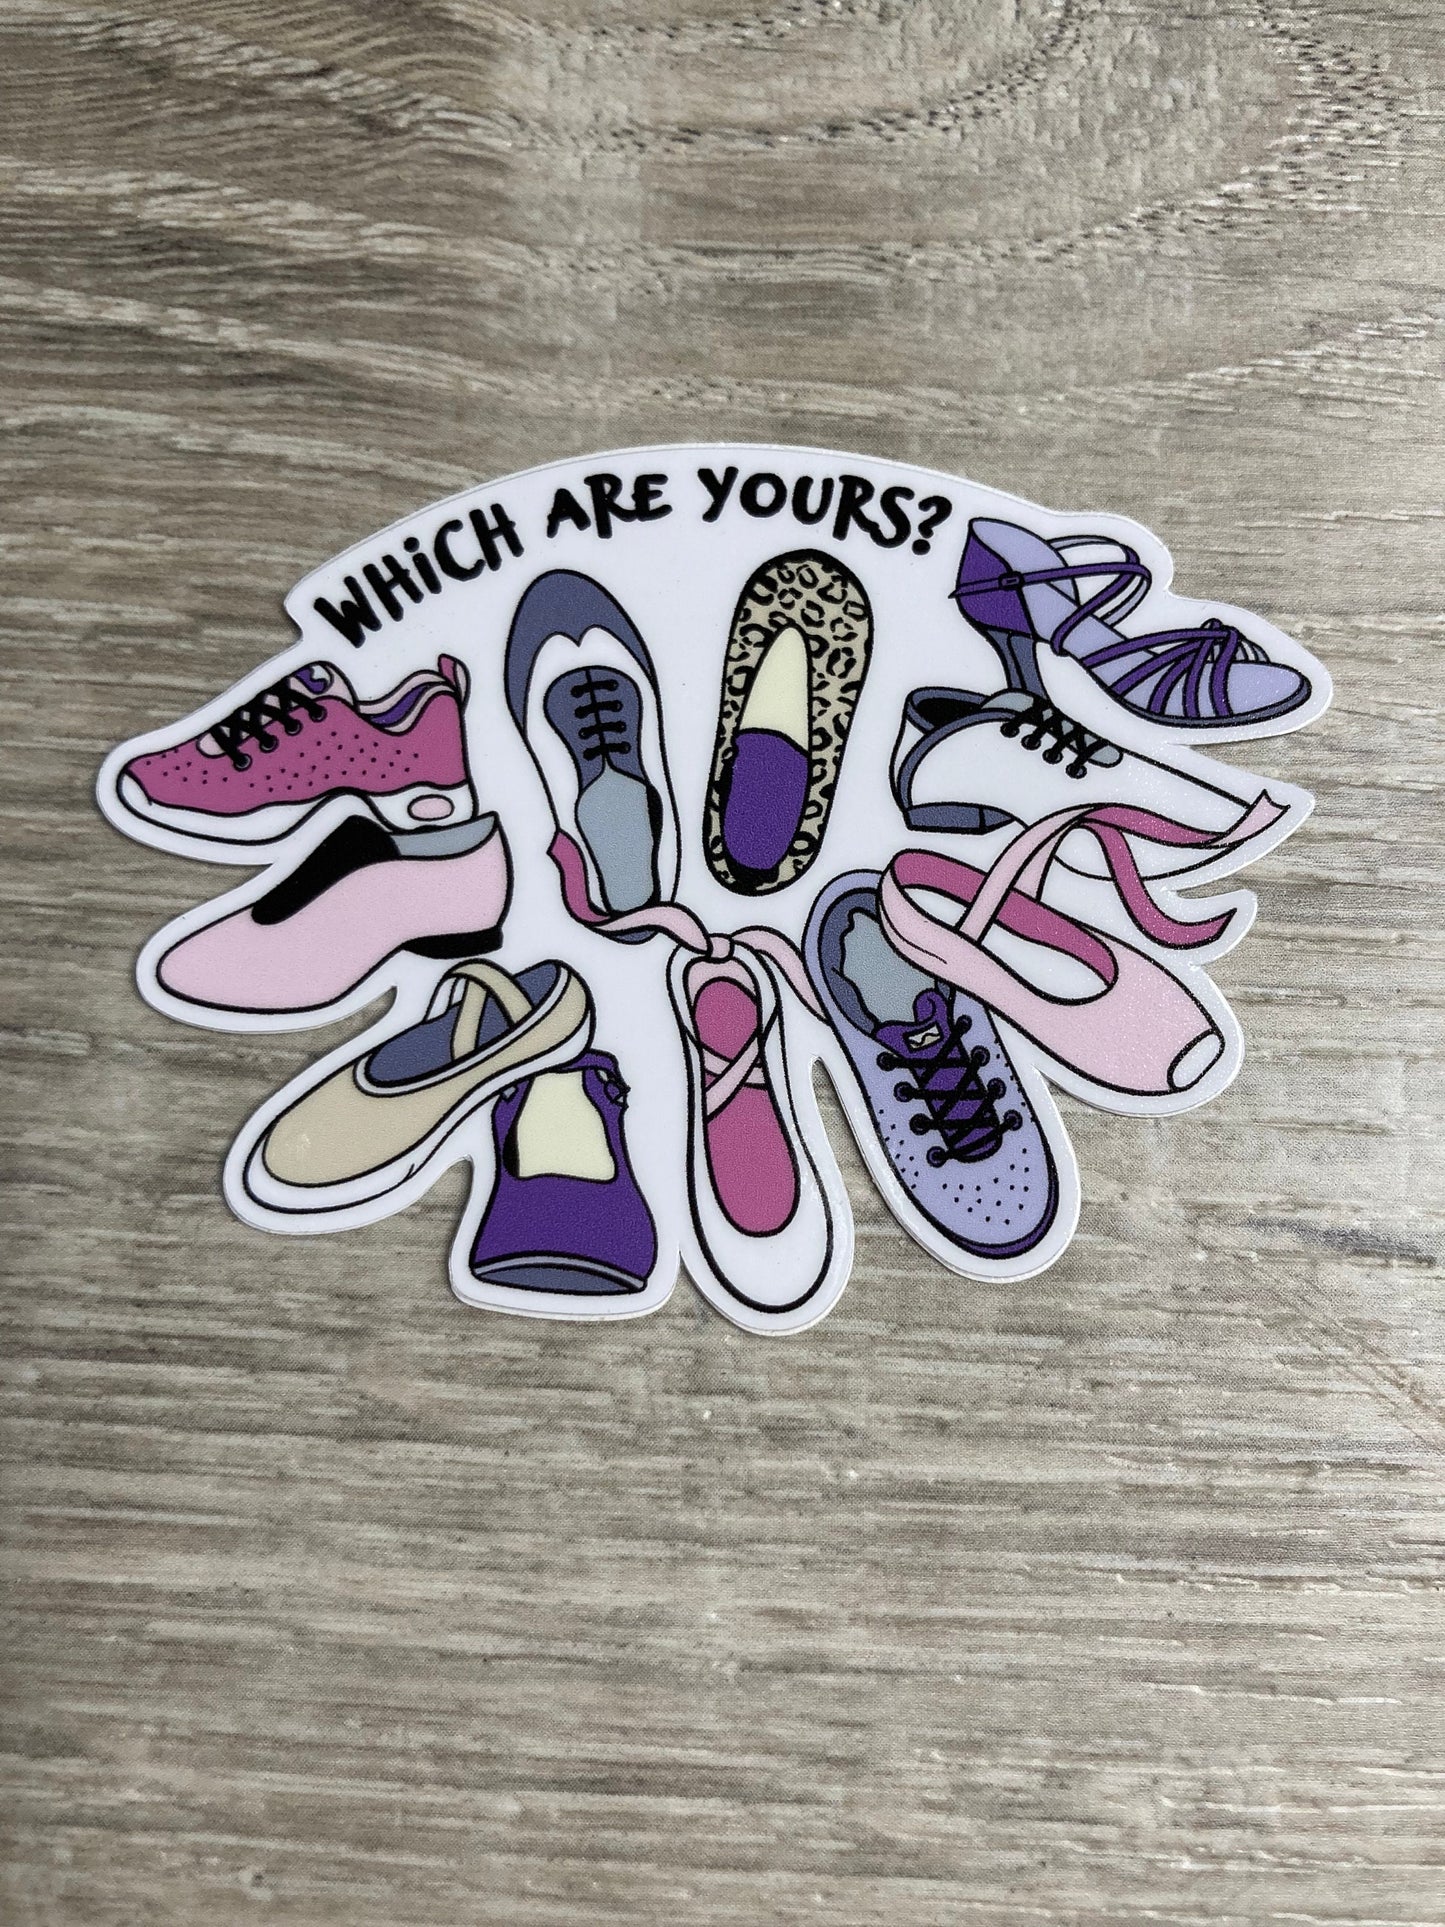 Which Are Yours Dance Shoes Vinyl Sticker, Vinyl Decal, Laptop Sticker, Dance Sticker, Gifts For Dancers,